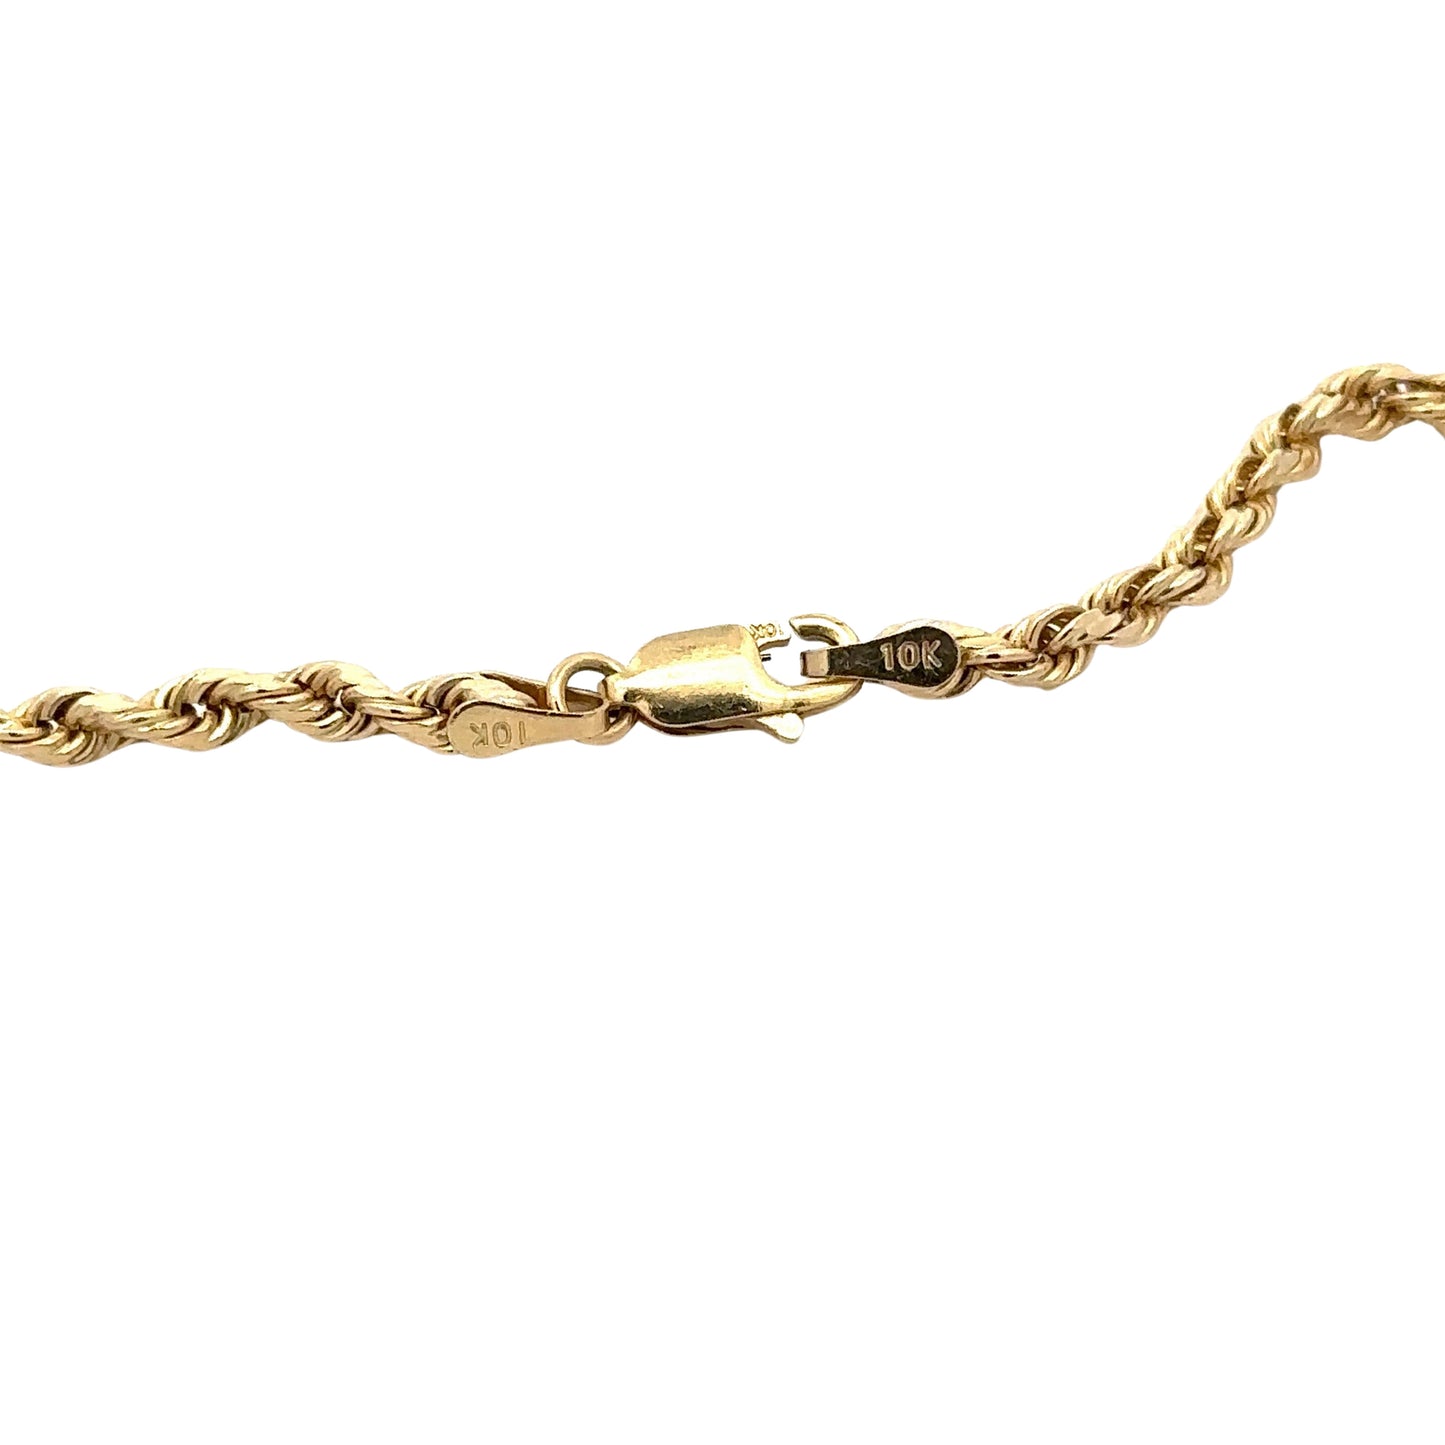 10K yellow gold lobster clasp with stamp and scratches on clasp